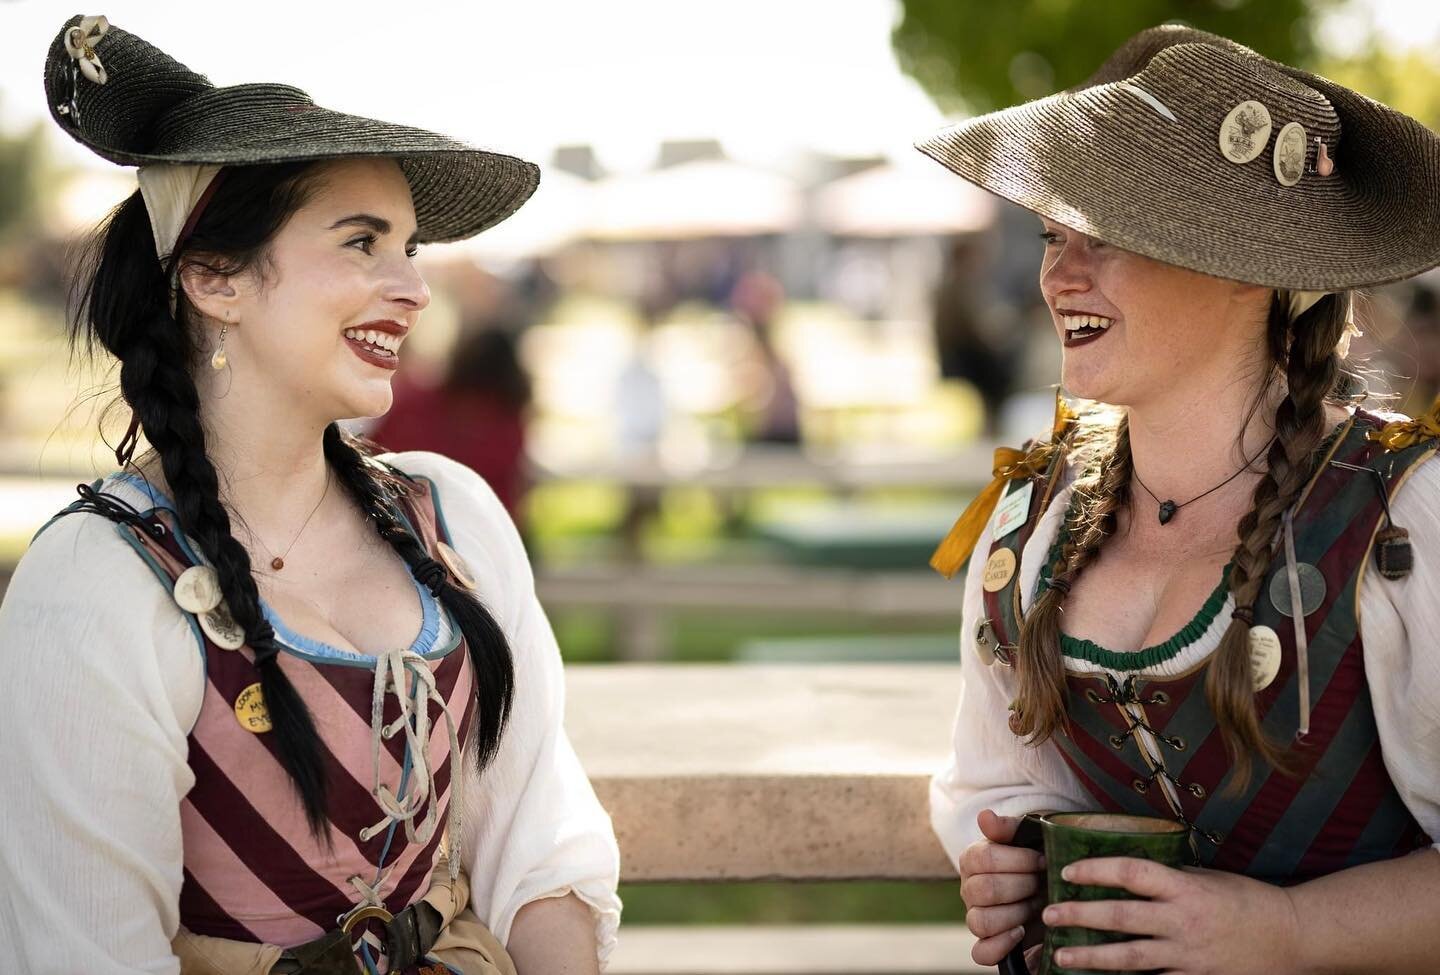 Weekend 2 of @renaissancepleasurefaire is in the books, and we already can&rsquo;t wait for weekend 3! Who is coming out this weekend?! We can&rsquo;t wait to see you! 

PHOTO BY: Ron Frary

#merrywives #renaissancefaire #renfaire #socalrenfaire #mer